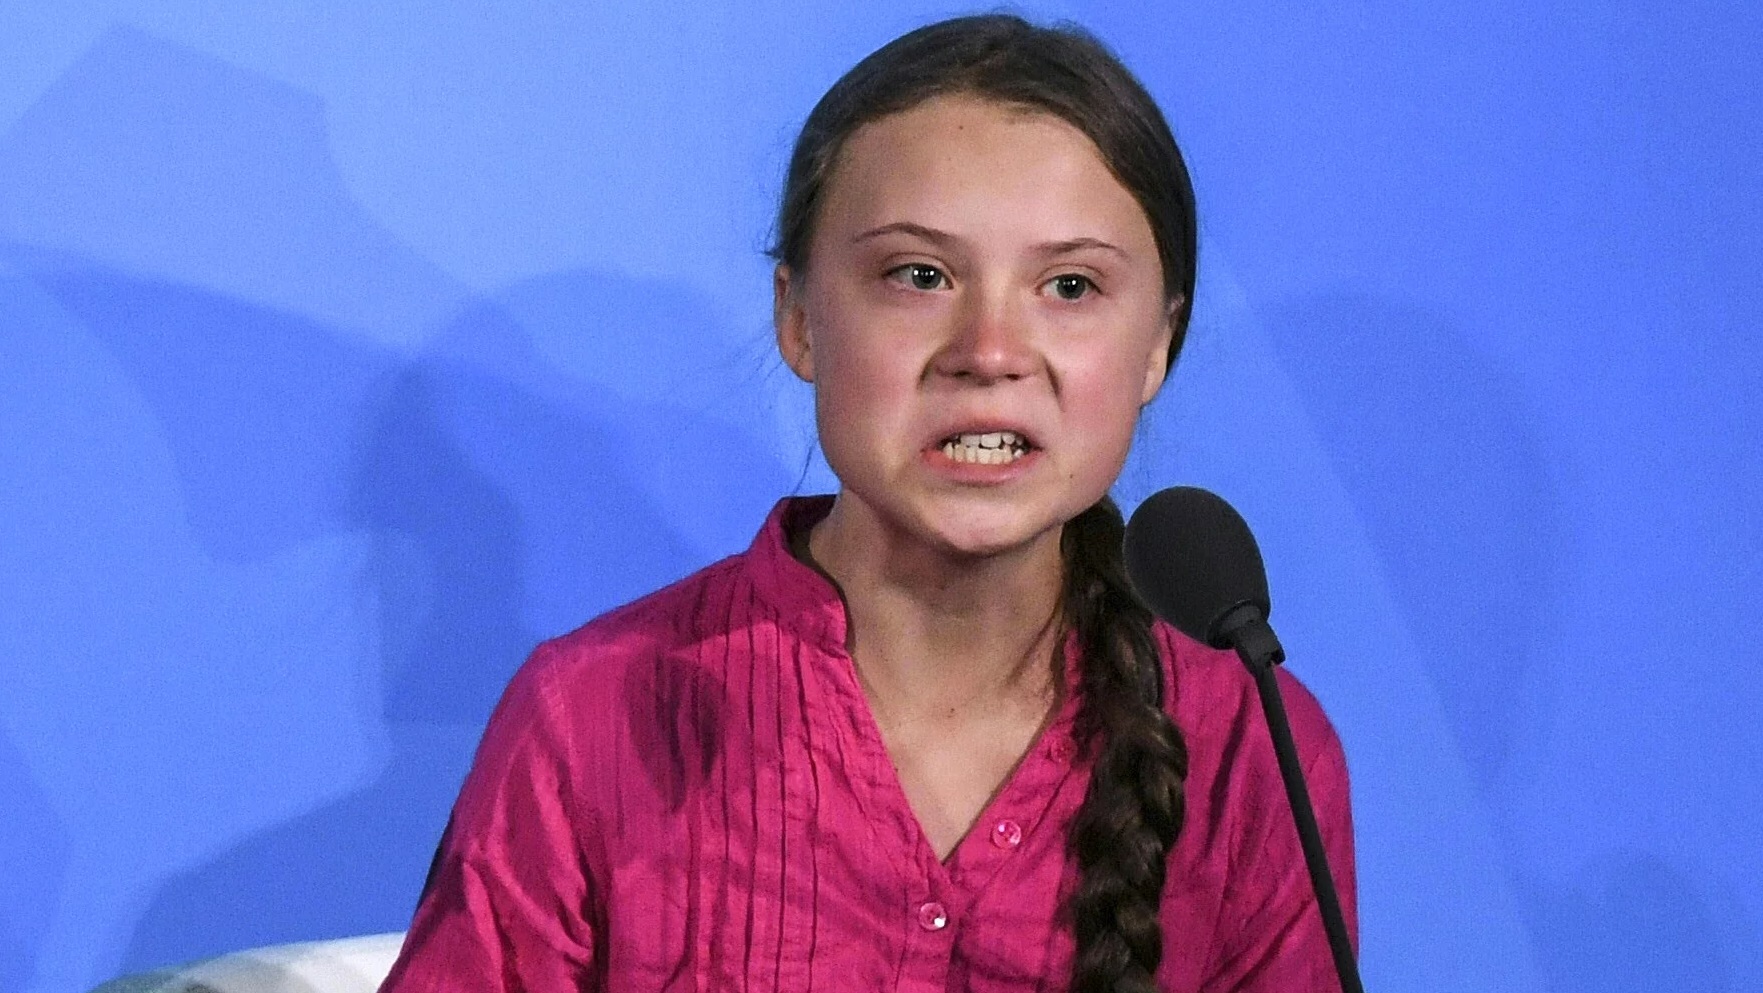 Image: OBEY! Eco-alarmist child Greta Thunberg demands all her opponents be silenced… and Big Tech is likely to comply, since obedience is now considered “tolerance”